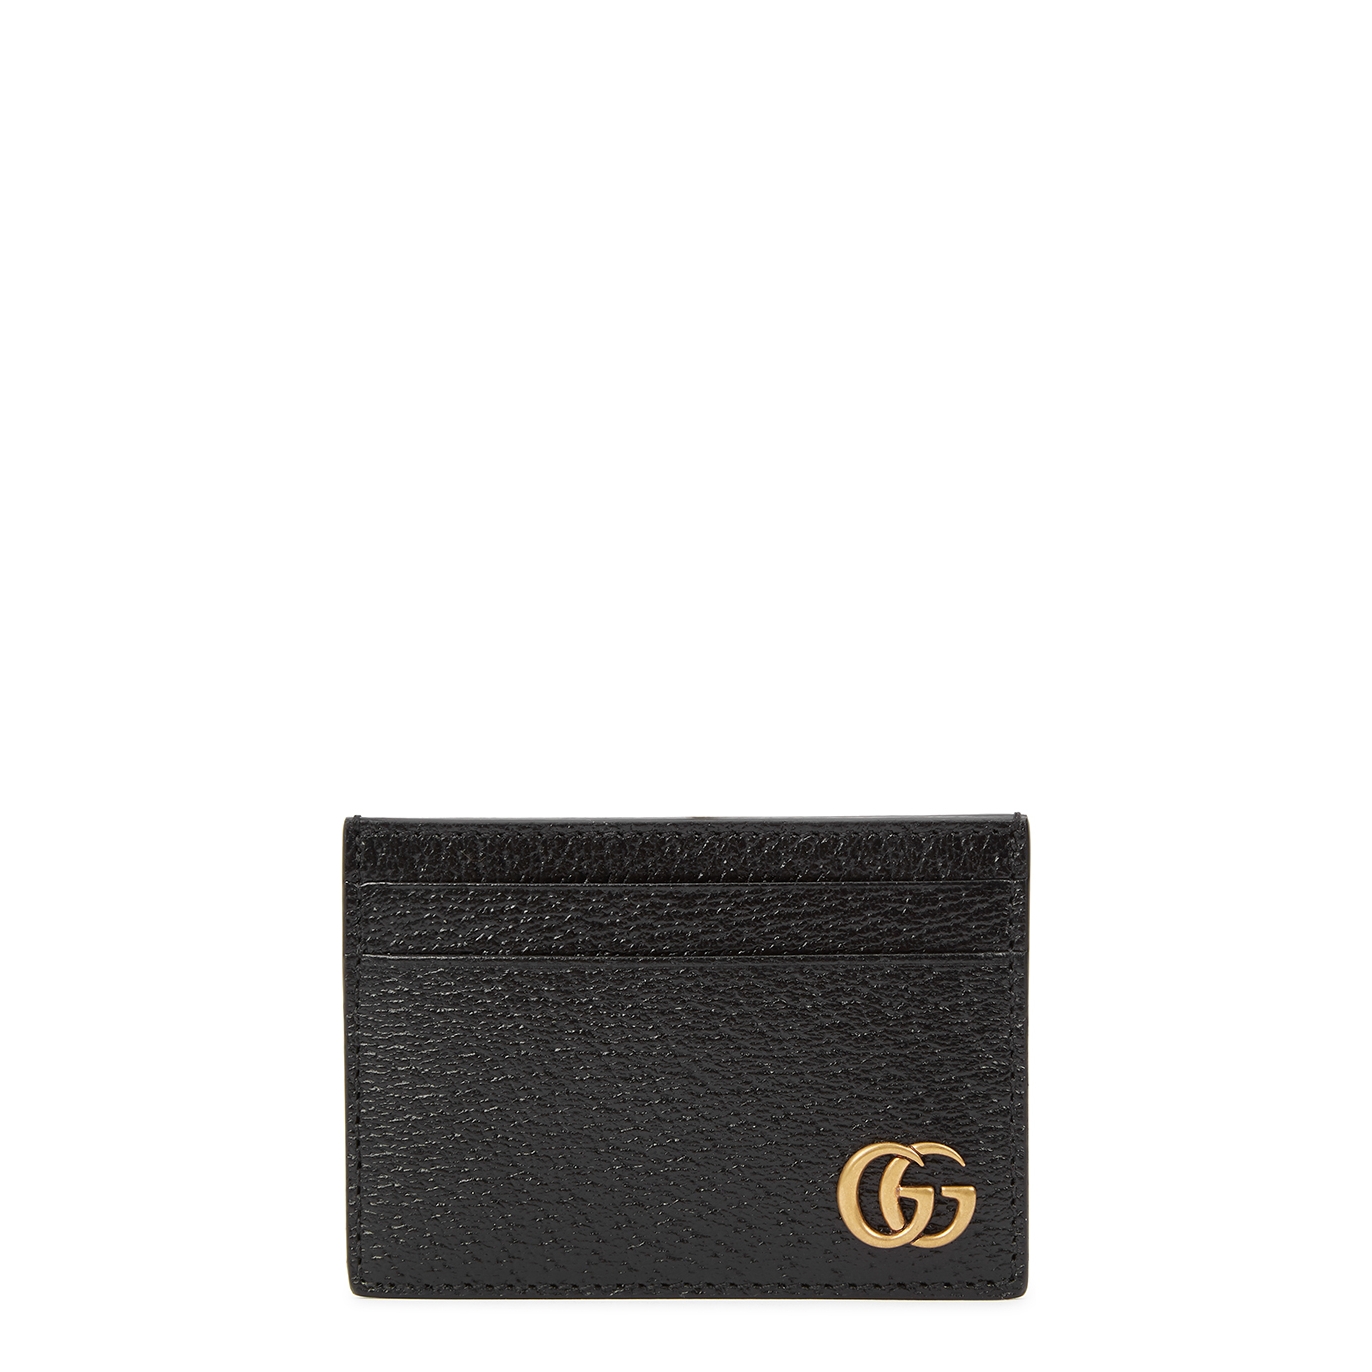 Gucci GG Marmont Leather Card Holder, Card Holder, Black